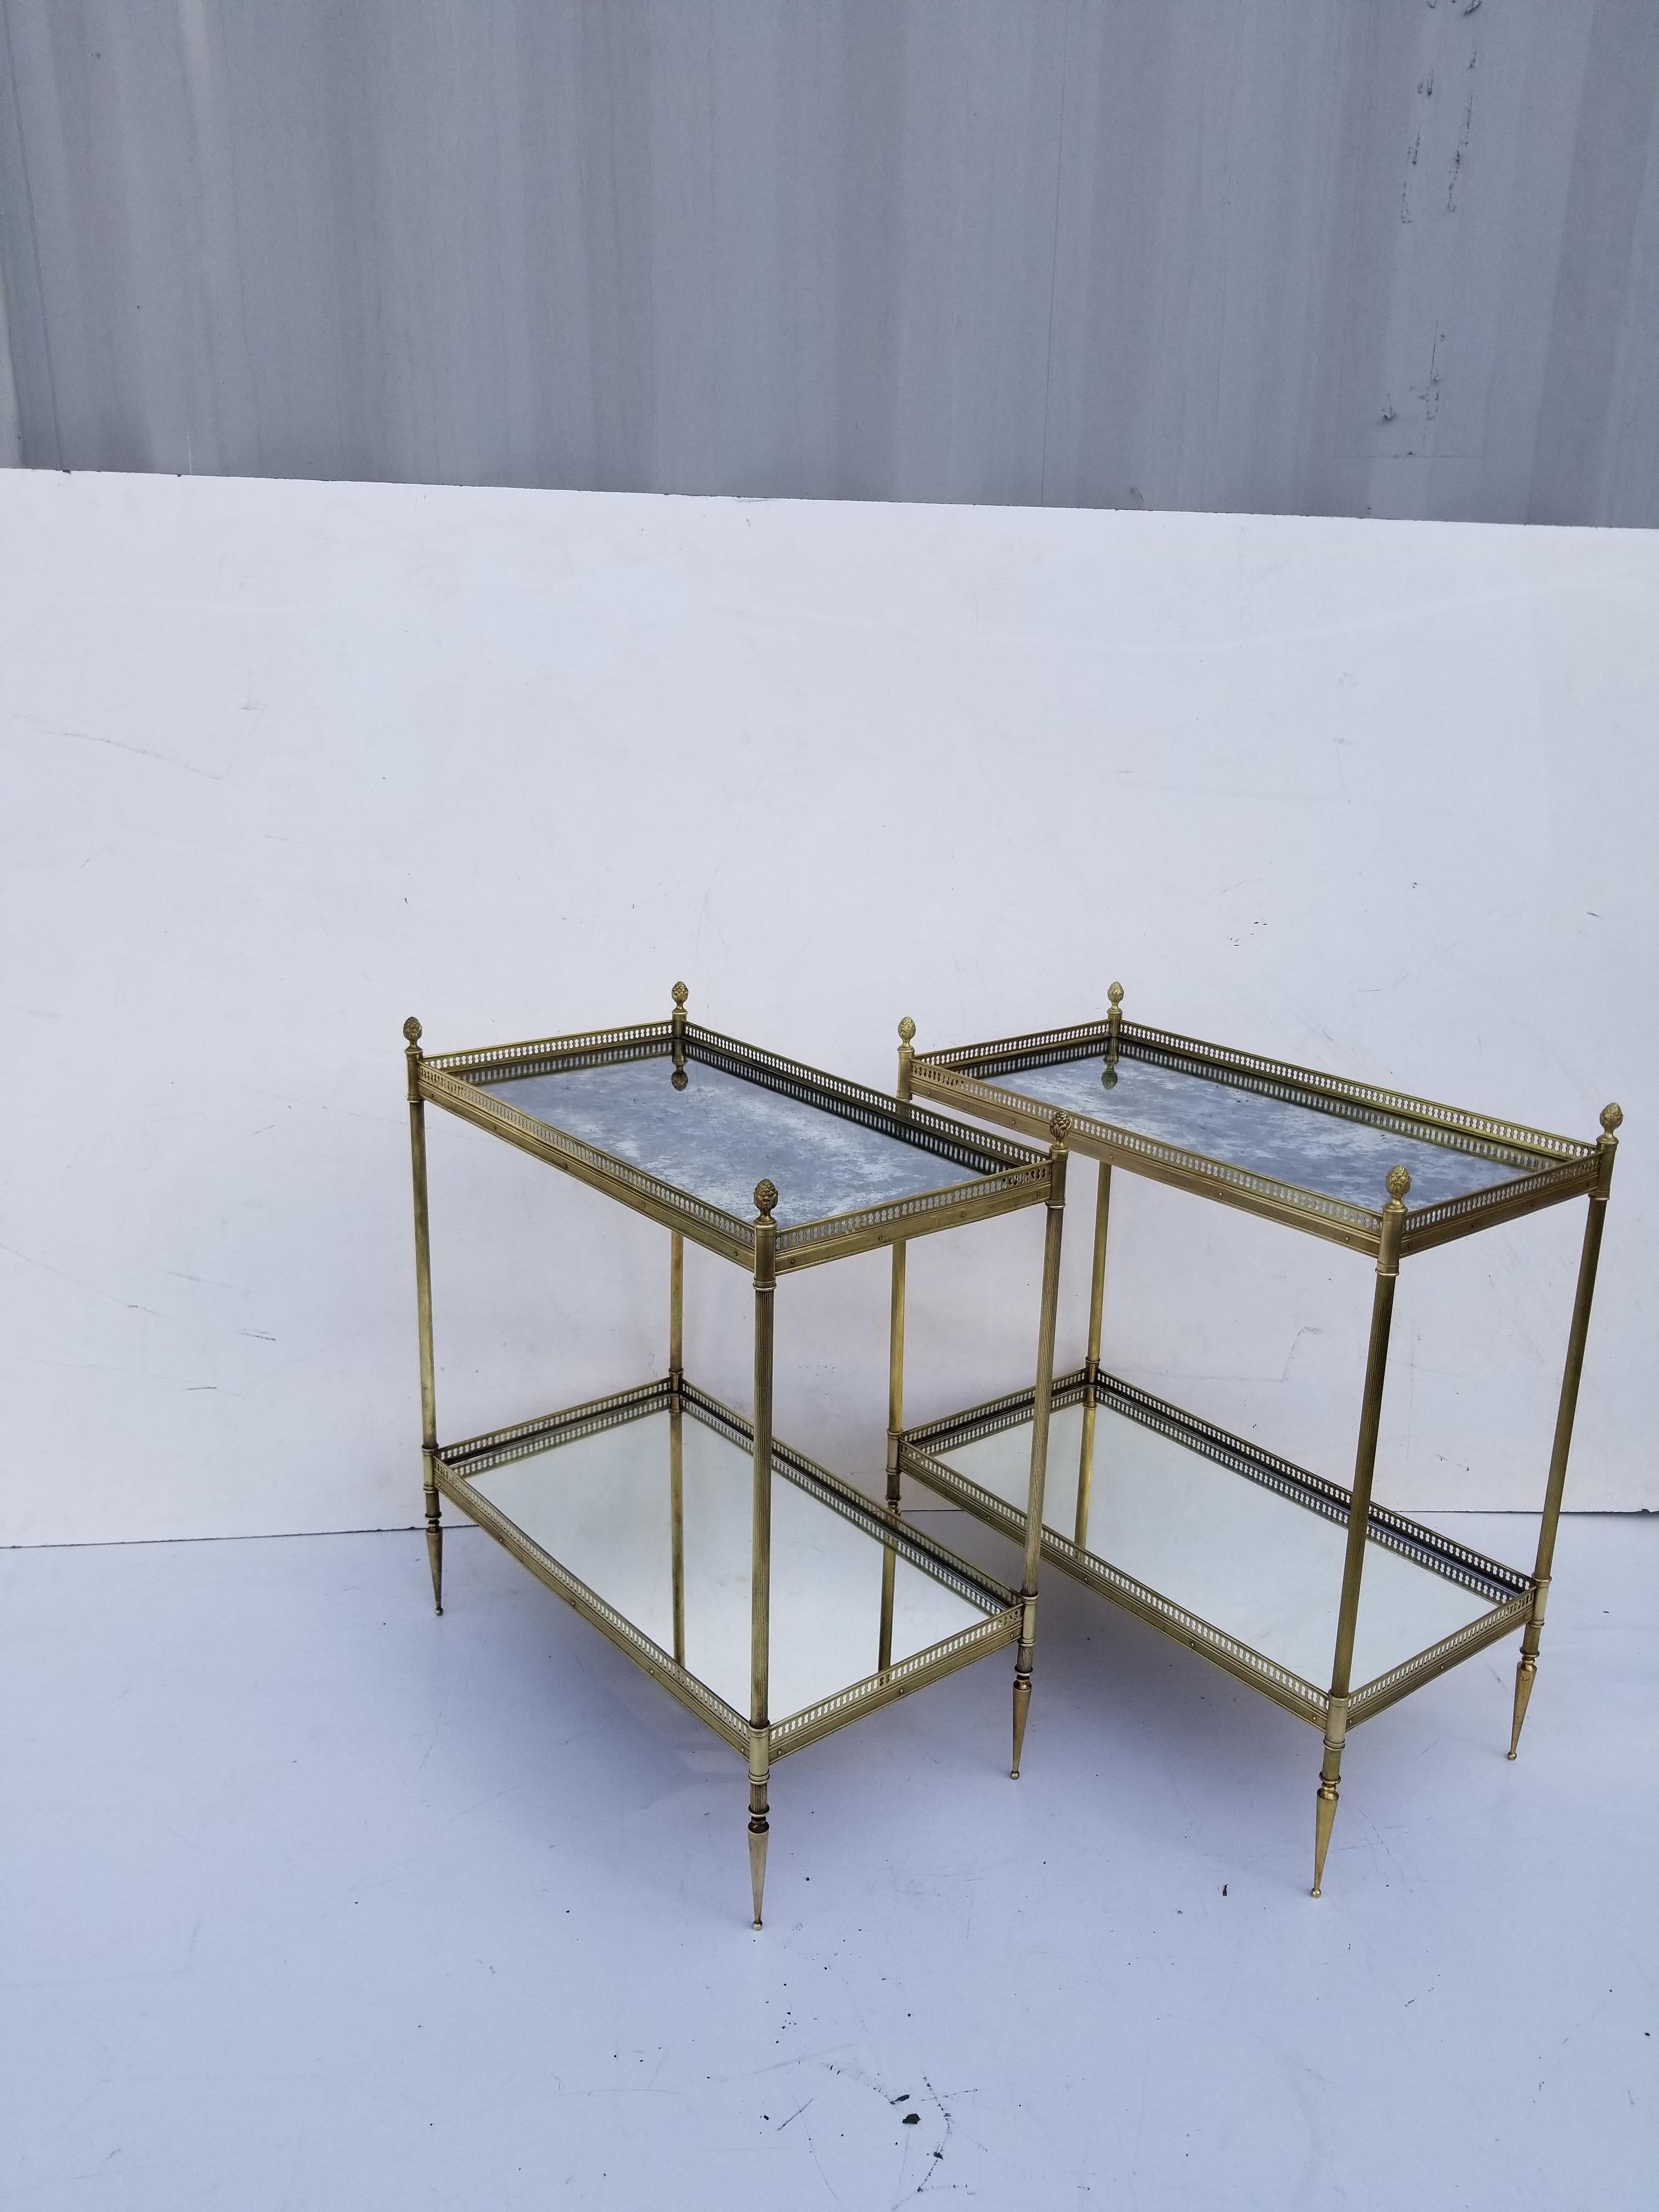 Pair of Maison Jansen side table, mirror tops. Brass gallery, bronze finials.
Very good vintage condition.
8 